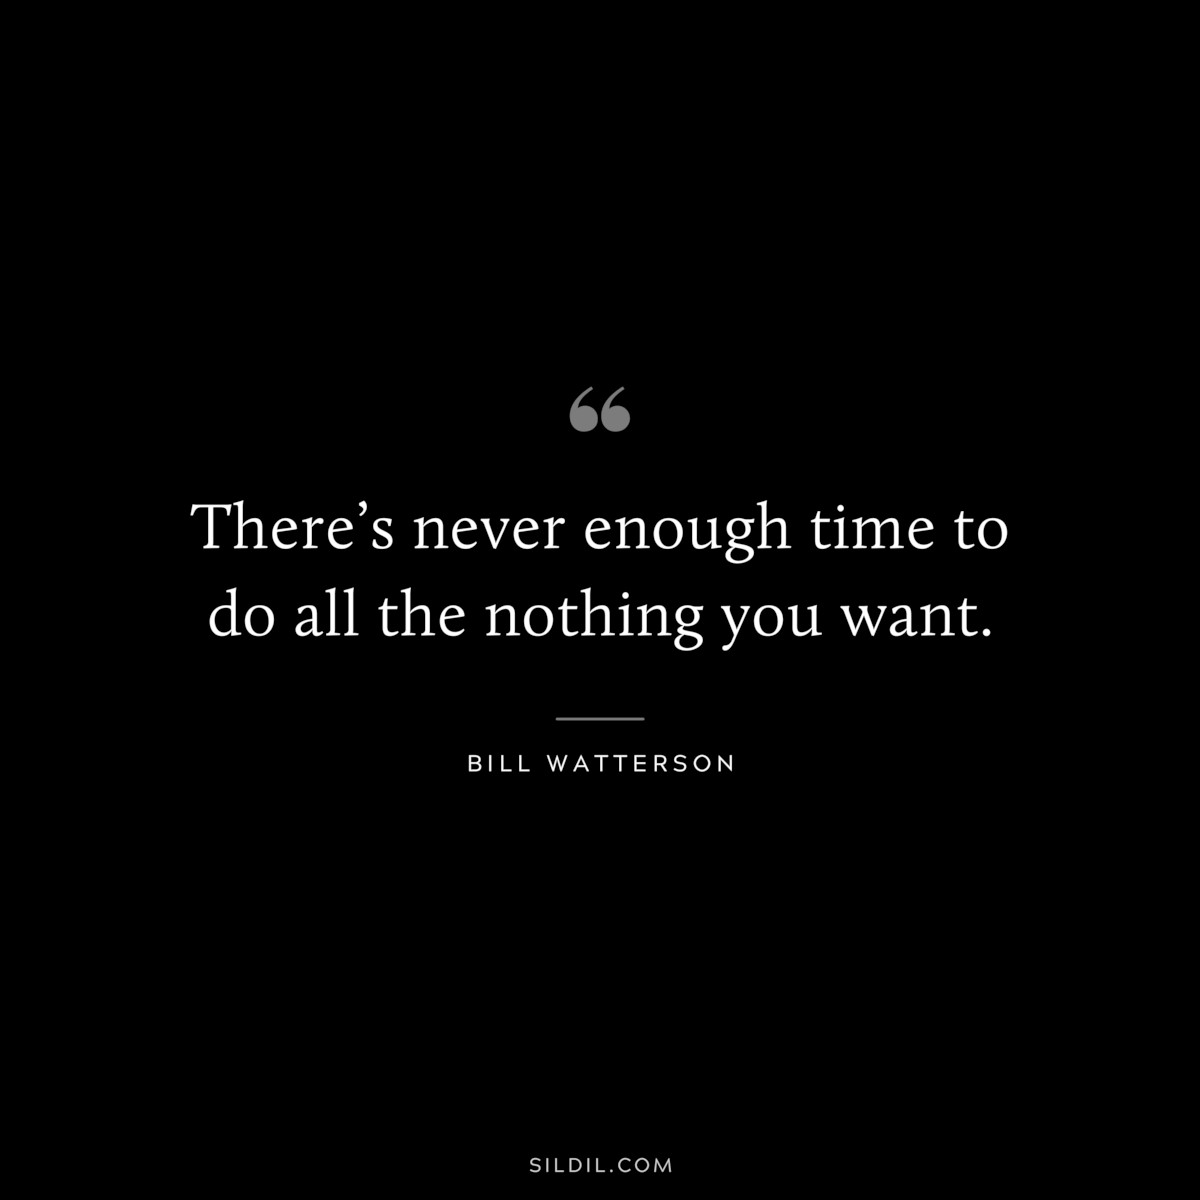 There’s never enough time to do all the nothing you want. ― Bill Watterson